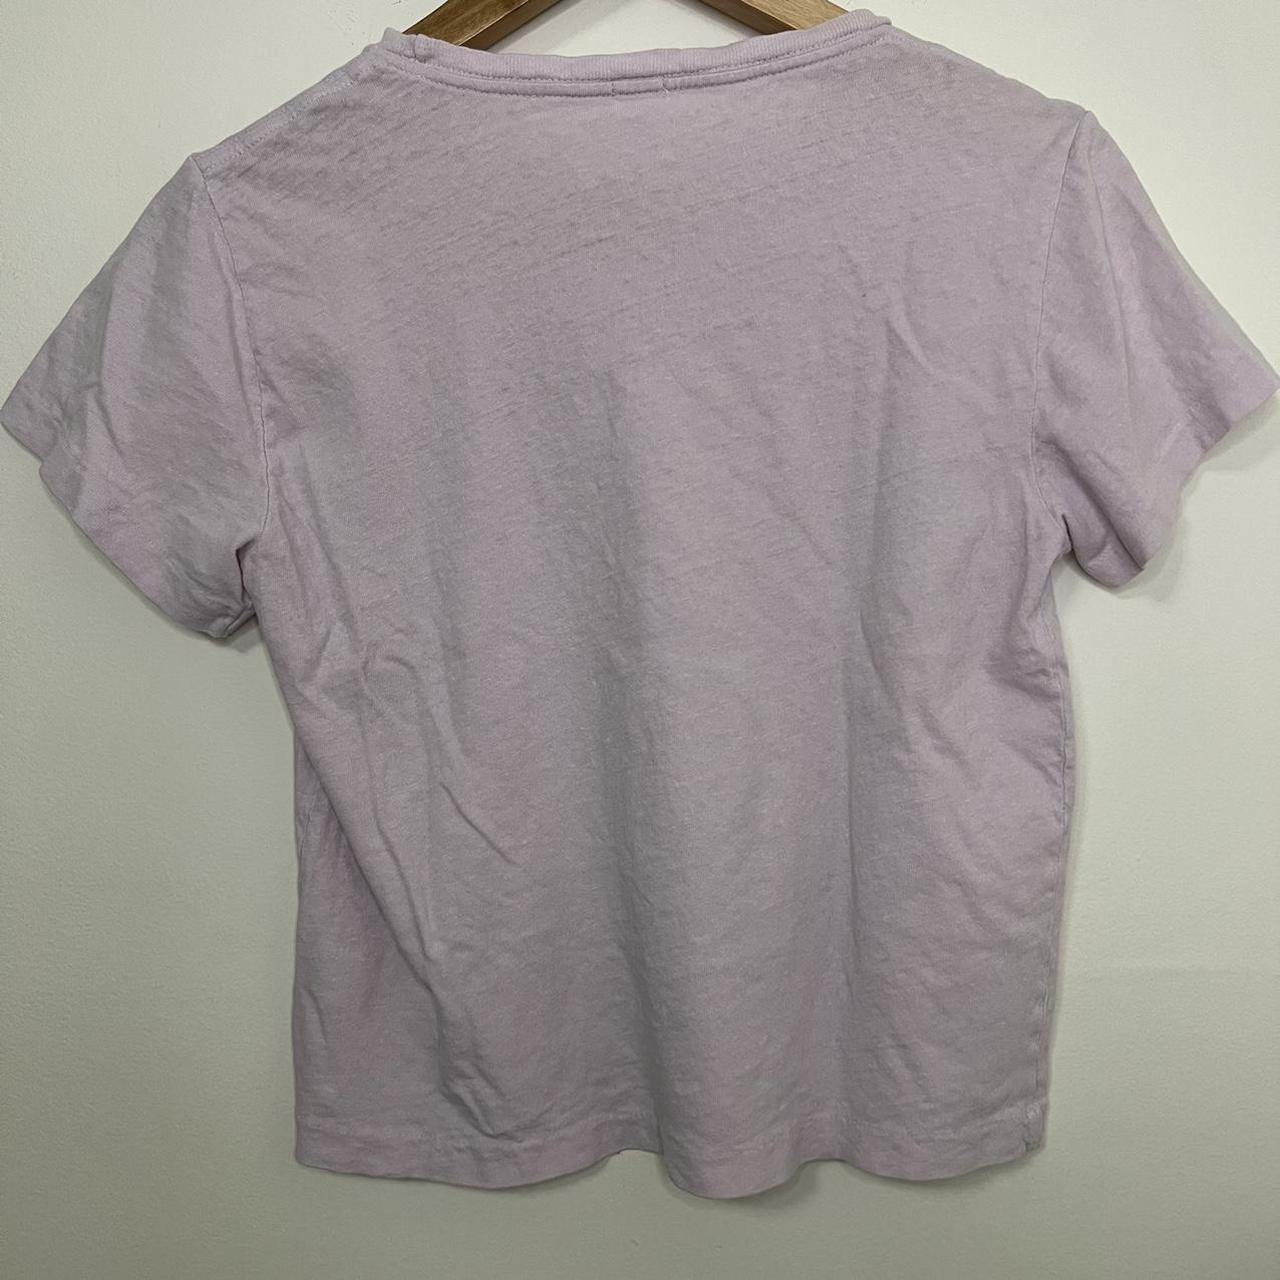 RE/DONE Women's White and Purple T-shirt (4)